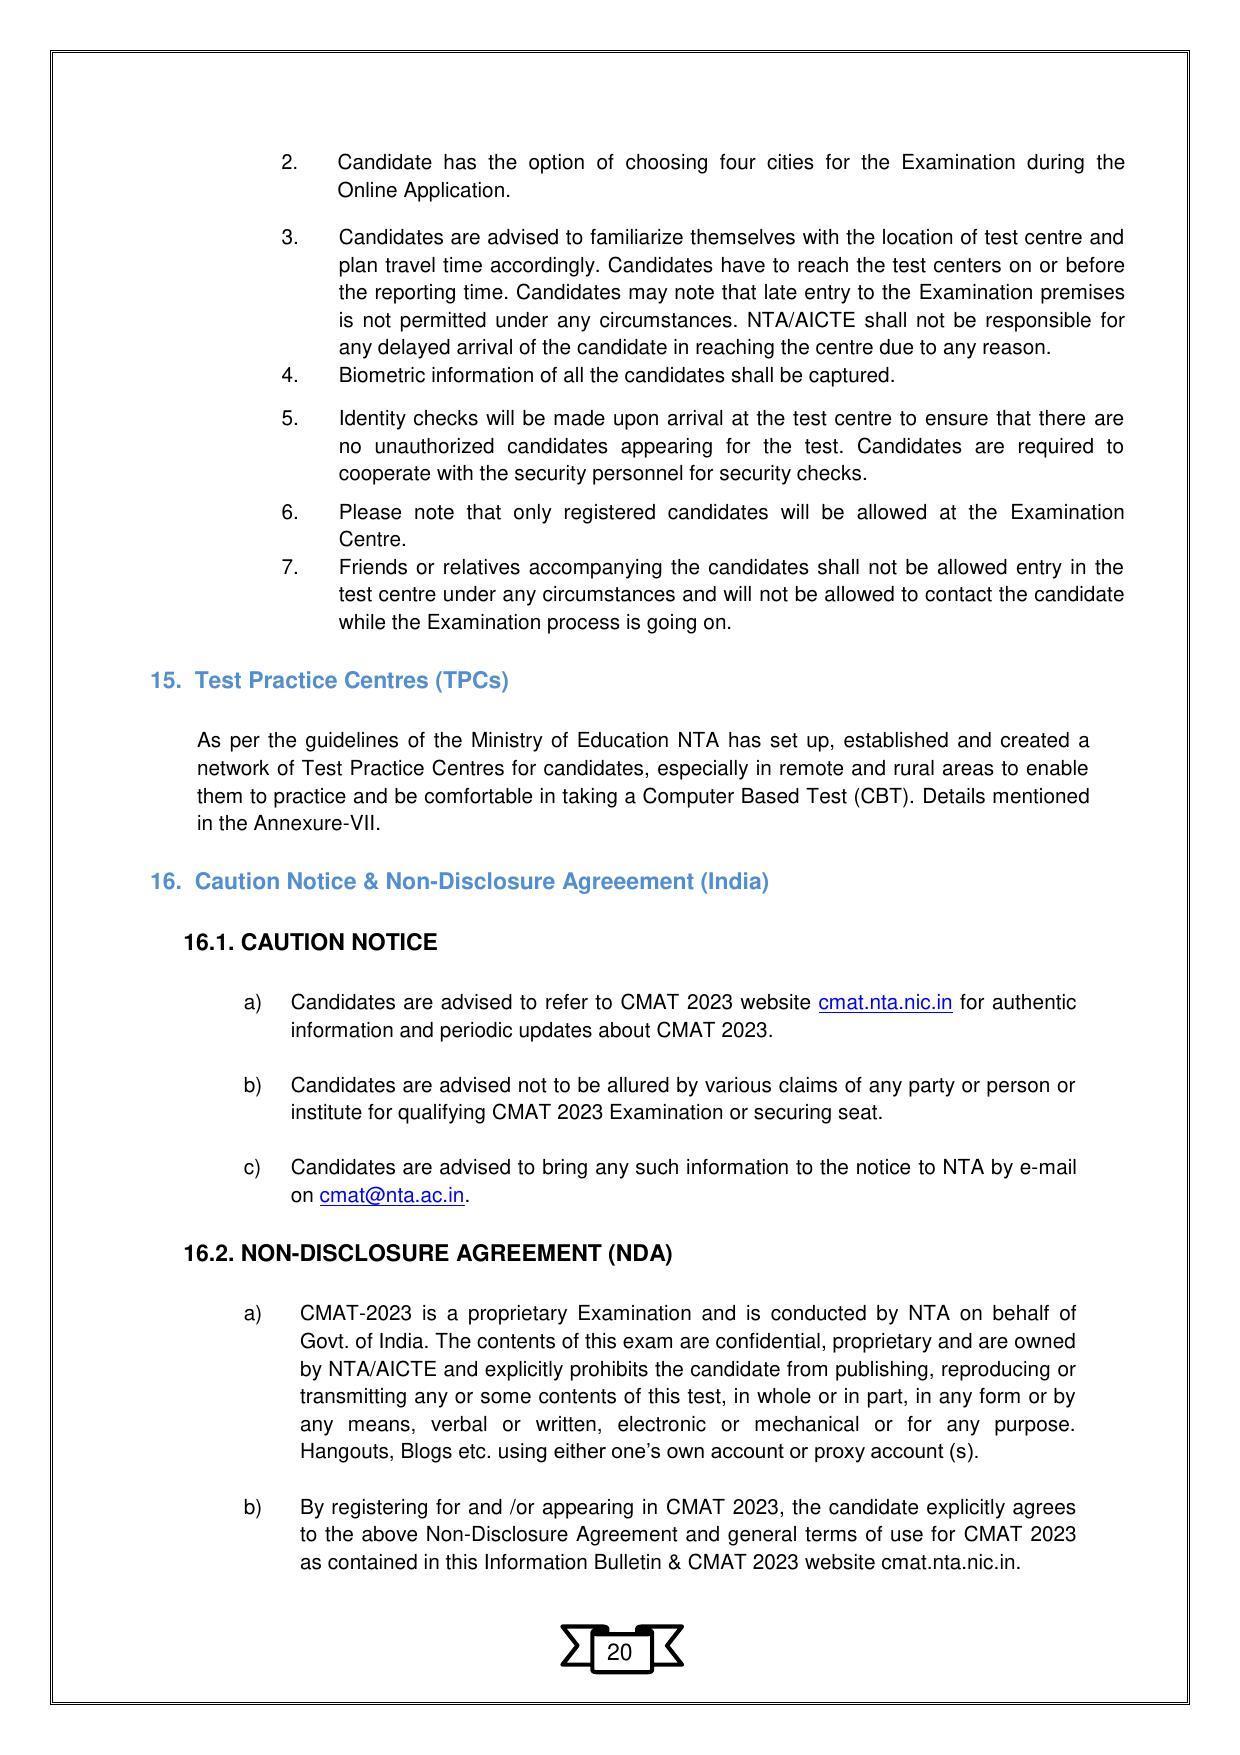 CMAT 2023 Information Bulletin - Page 23